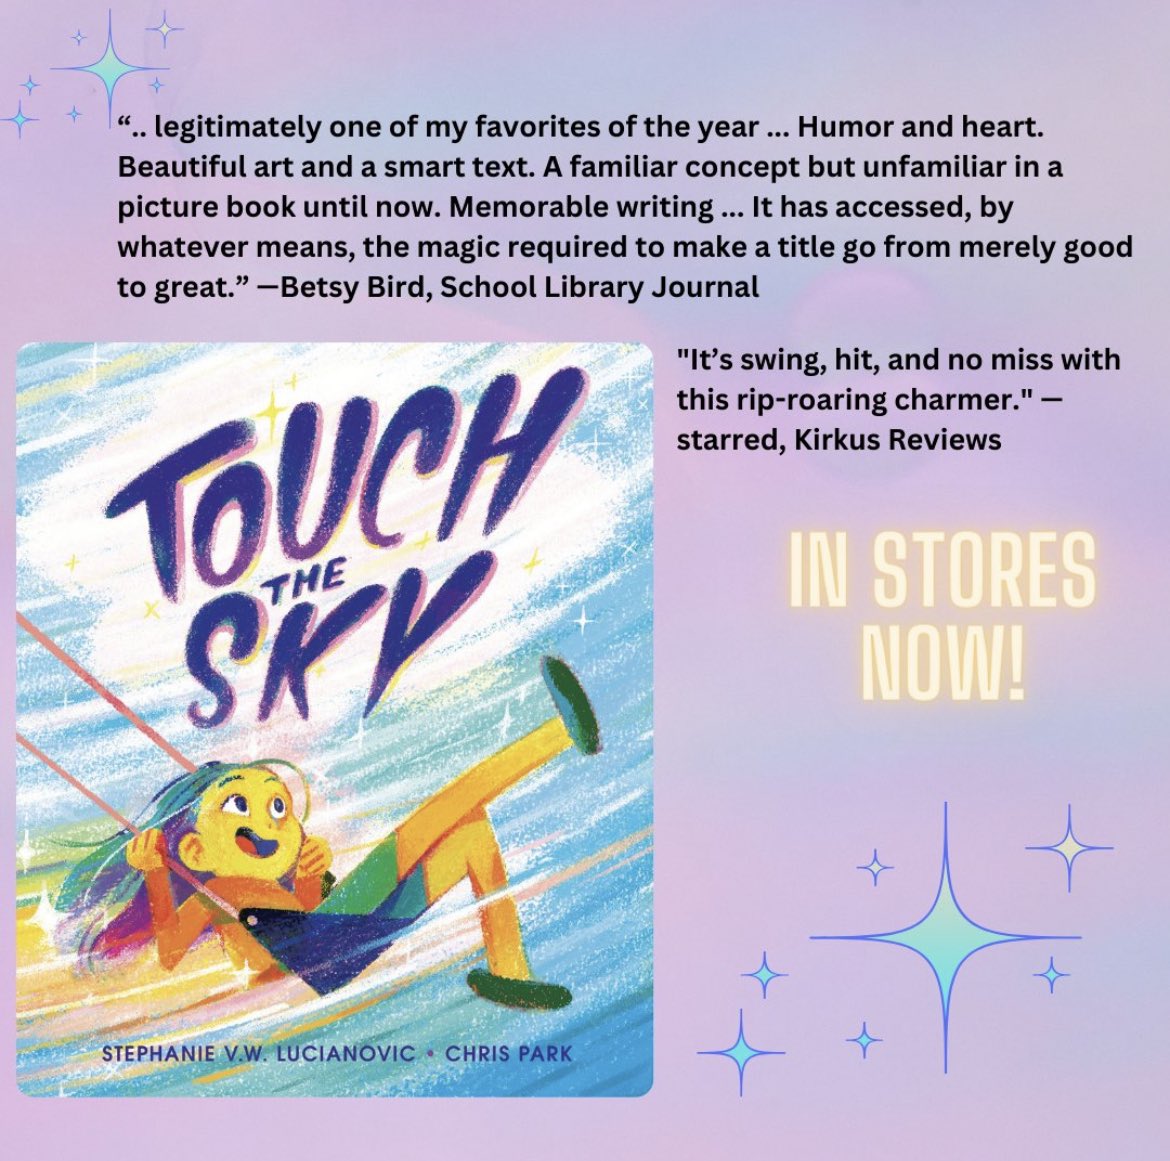 Happiest #bookbirthday to TOUCH THE SKY with memorable words from @grubreport and stunning art from @chris_d_park! This is a must-have picture book for every kiddo! Congratulations, Stephanie and Chris! #kidlit